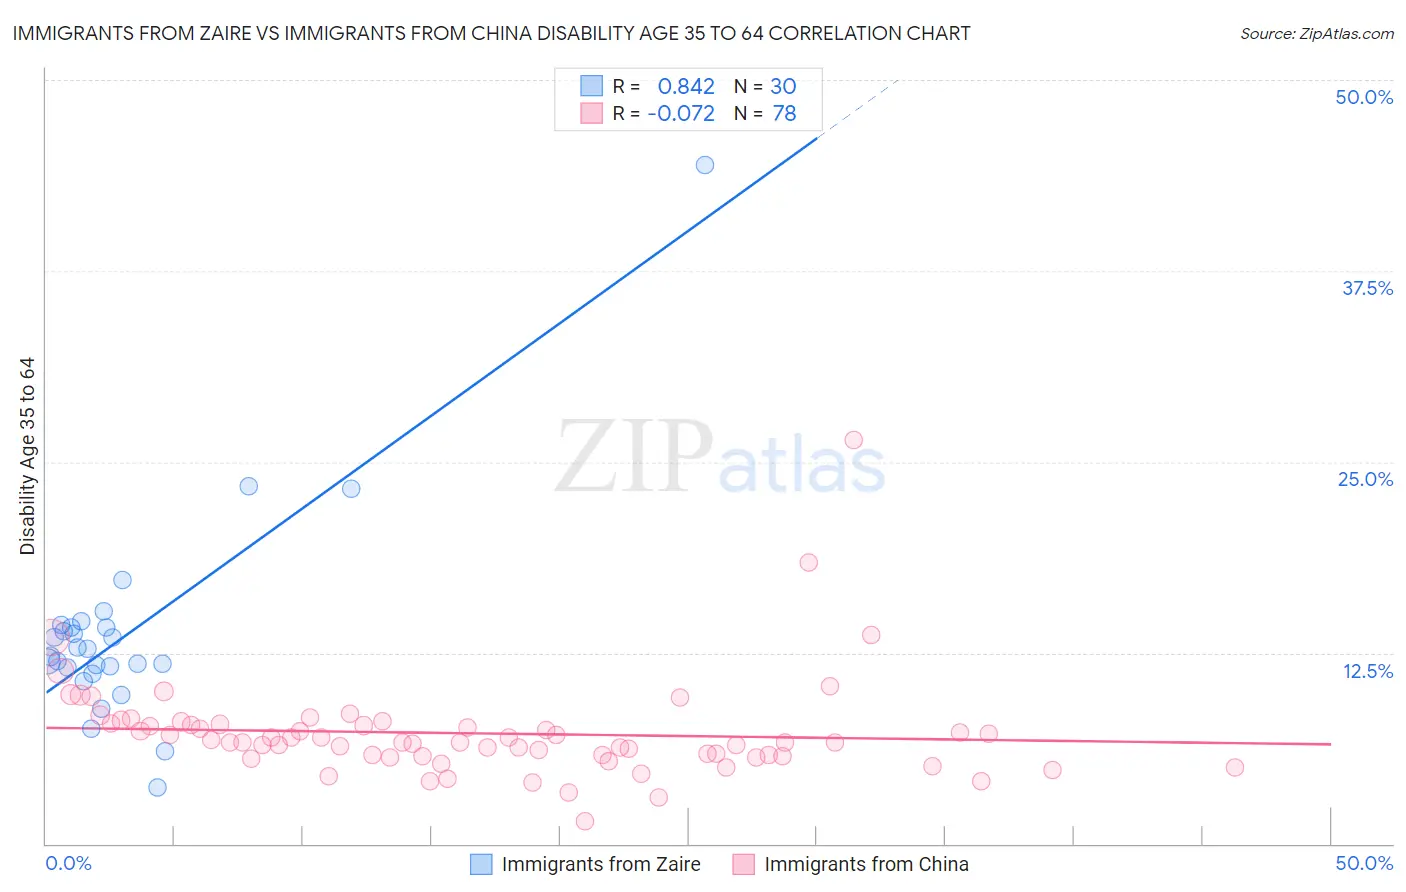 Immigrants from Zaire vs Immigrants from China Disability Age 35 to 64